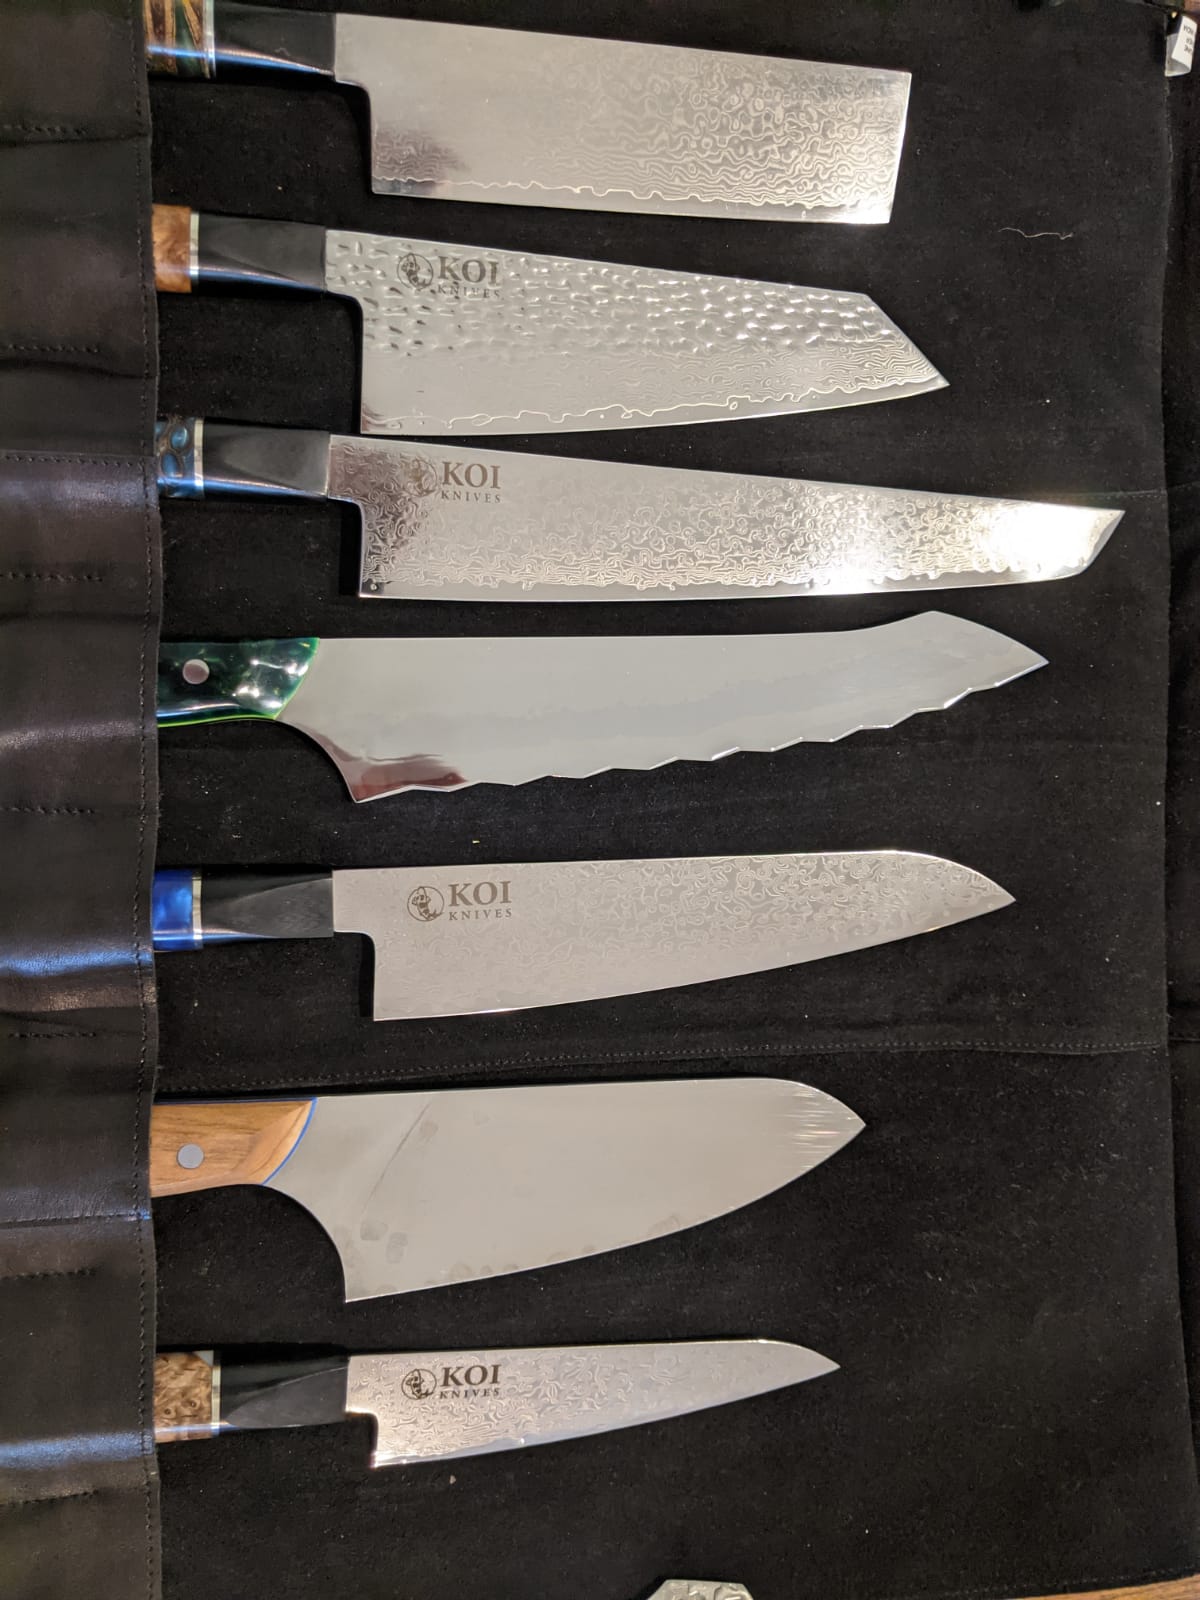 What Is The Correct Angle To Sharpen Japanese Knives?